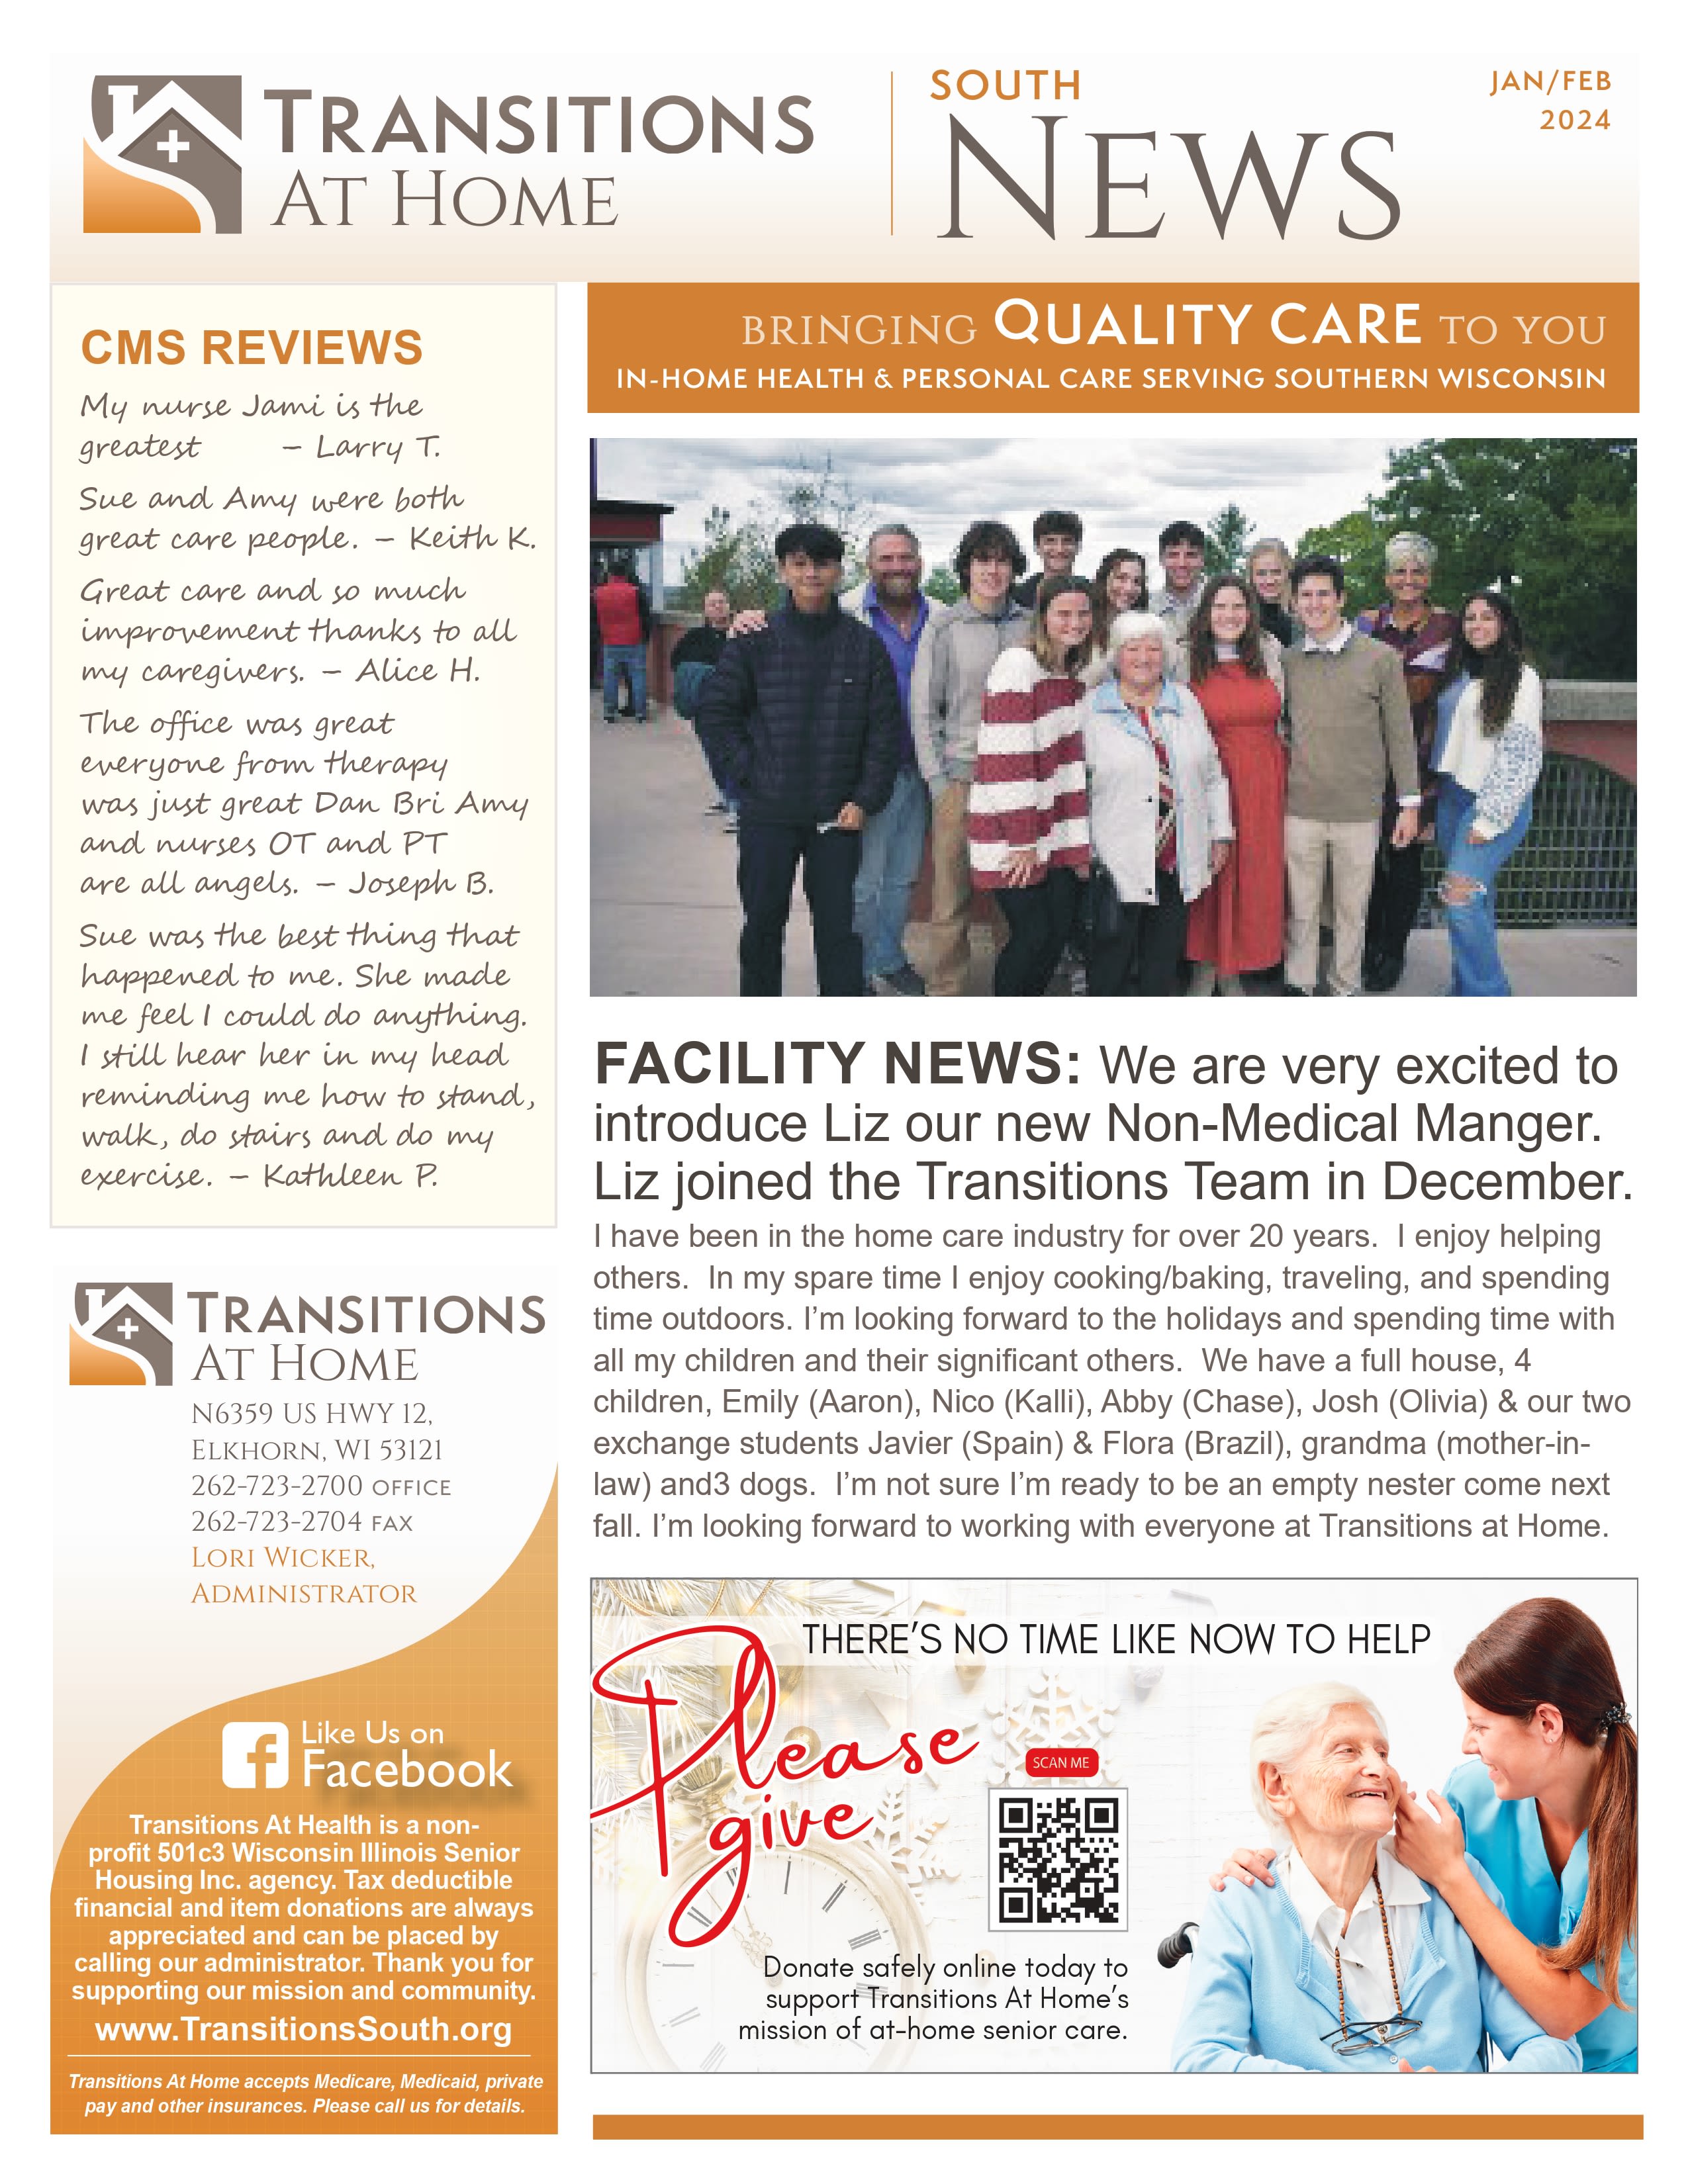 January 2024 Newsletter at Transitions At Home in Elkhorn, Wisconsin